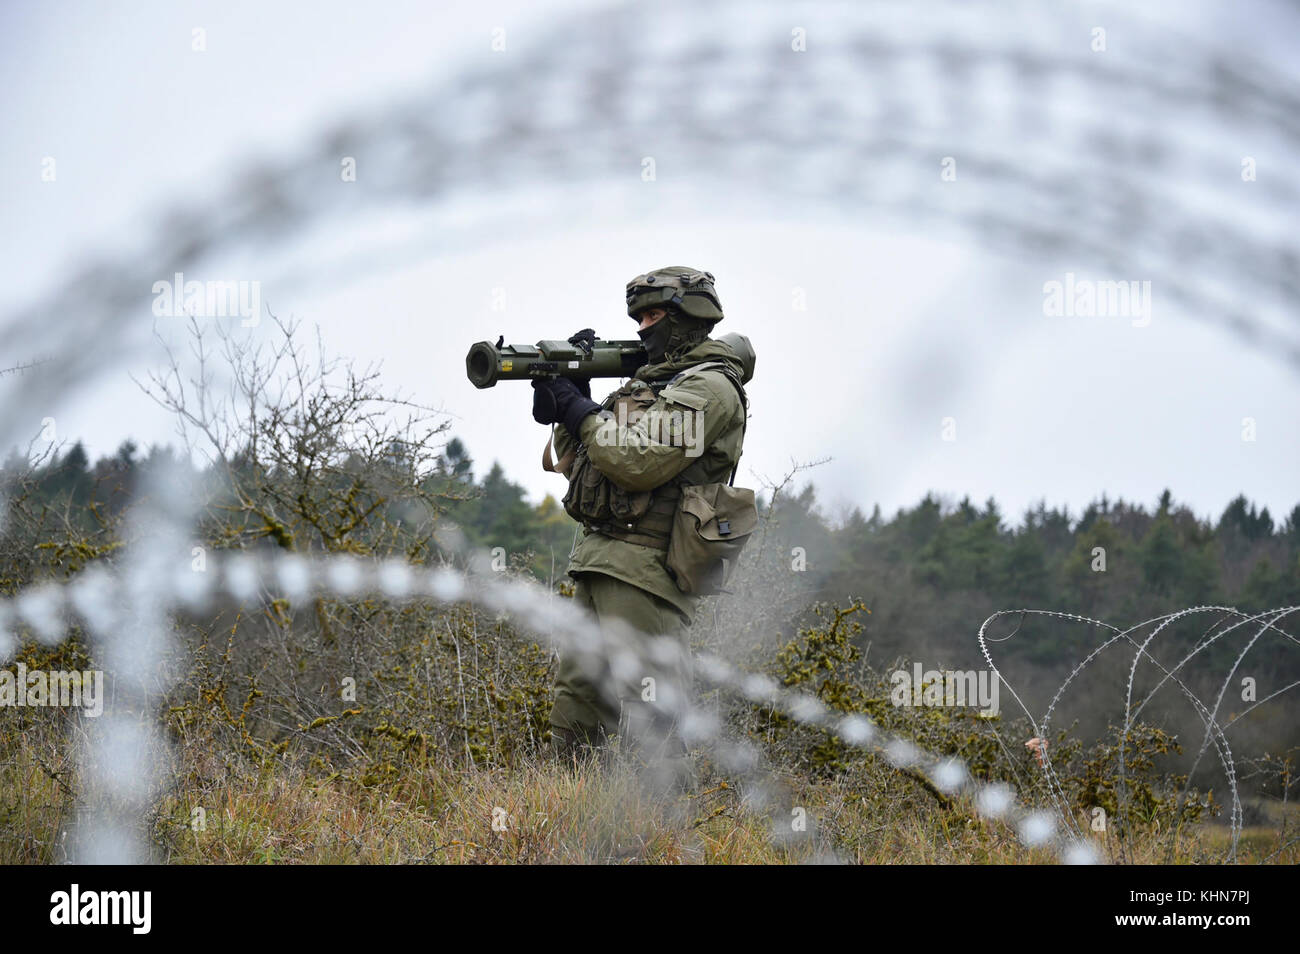 A Lithuanian soldier takes part in Exercise Allied Spirit VII at the 7th Army Training Command’s Hohenfels Training Area, Germany, Nov. 16, 2017. Approximately 4,050 service members from 13 nations are participating in the exercise from Oct. 30 to Nov. 22, 2017. Allied Spirit is a U.S. Army Europe-directed, 7ATC-conducted multinational exercise series designed to develop and enhance NATO and key partner’s interoperability and readiness. (U.S. Army photo by Gertrud Zach) Stock Photo